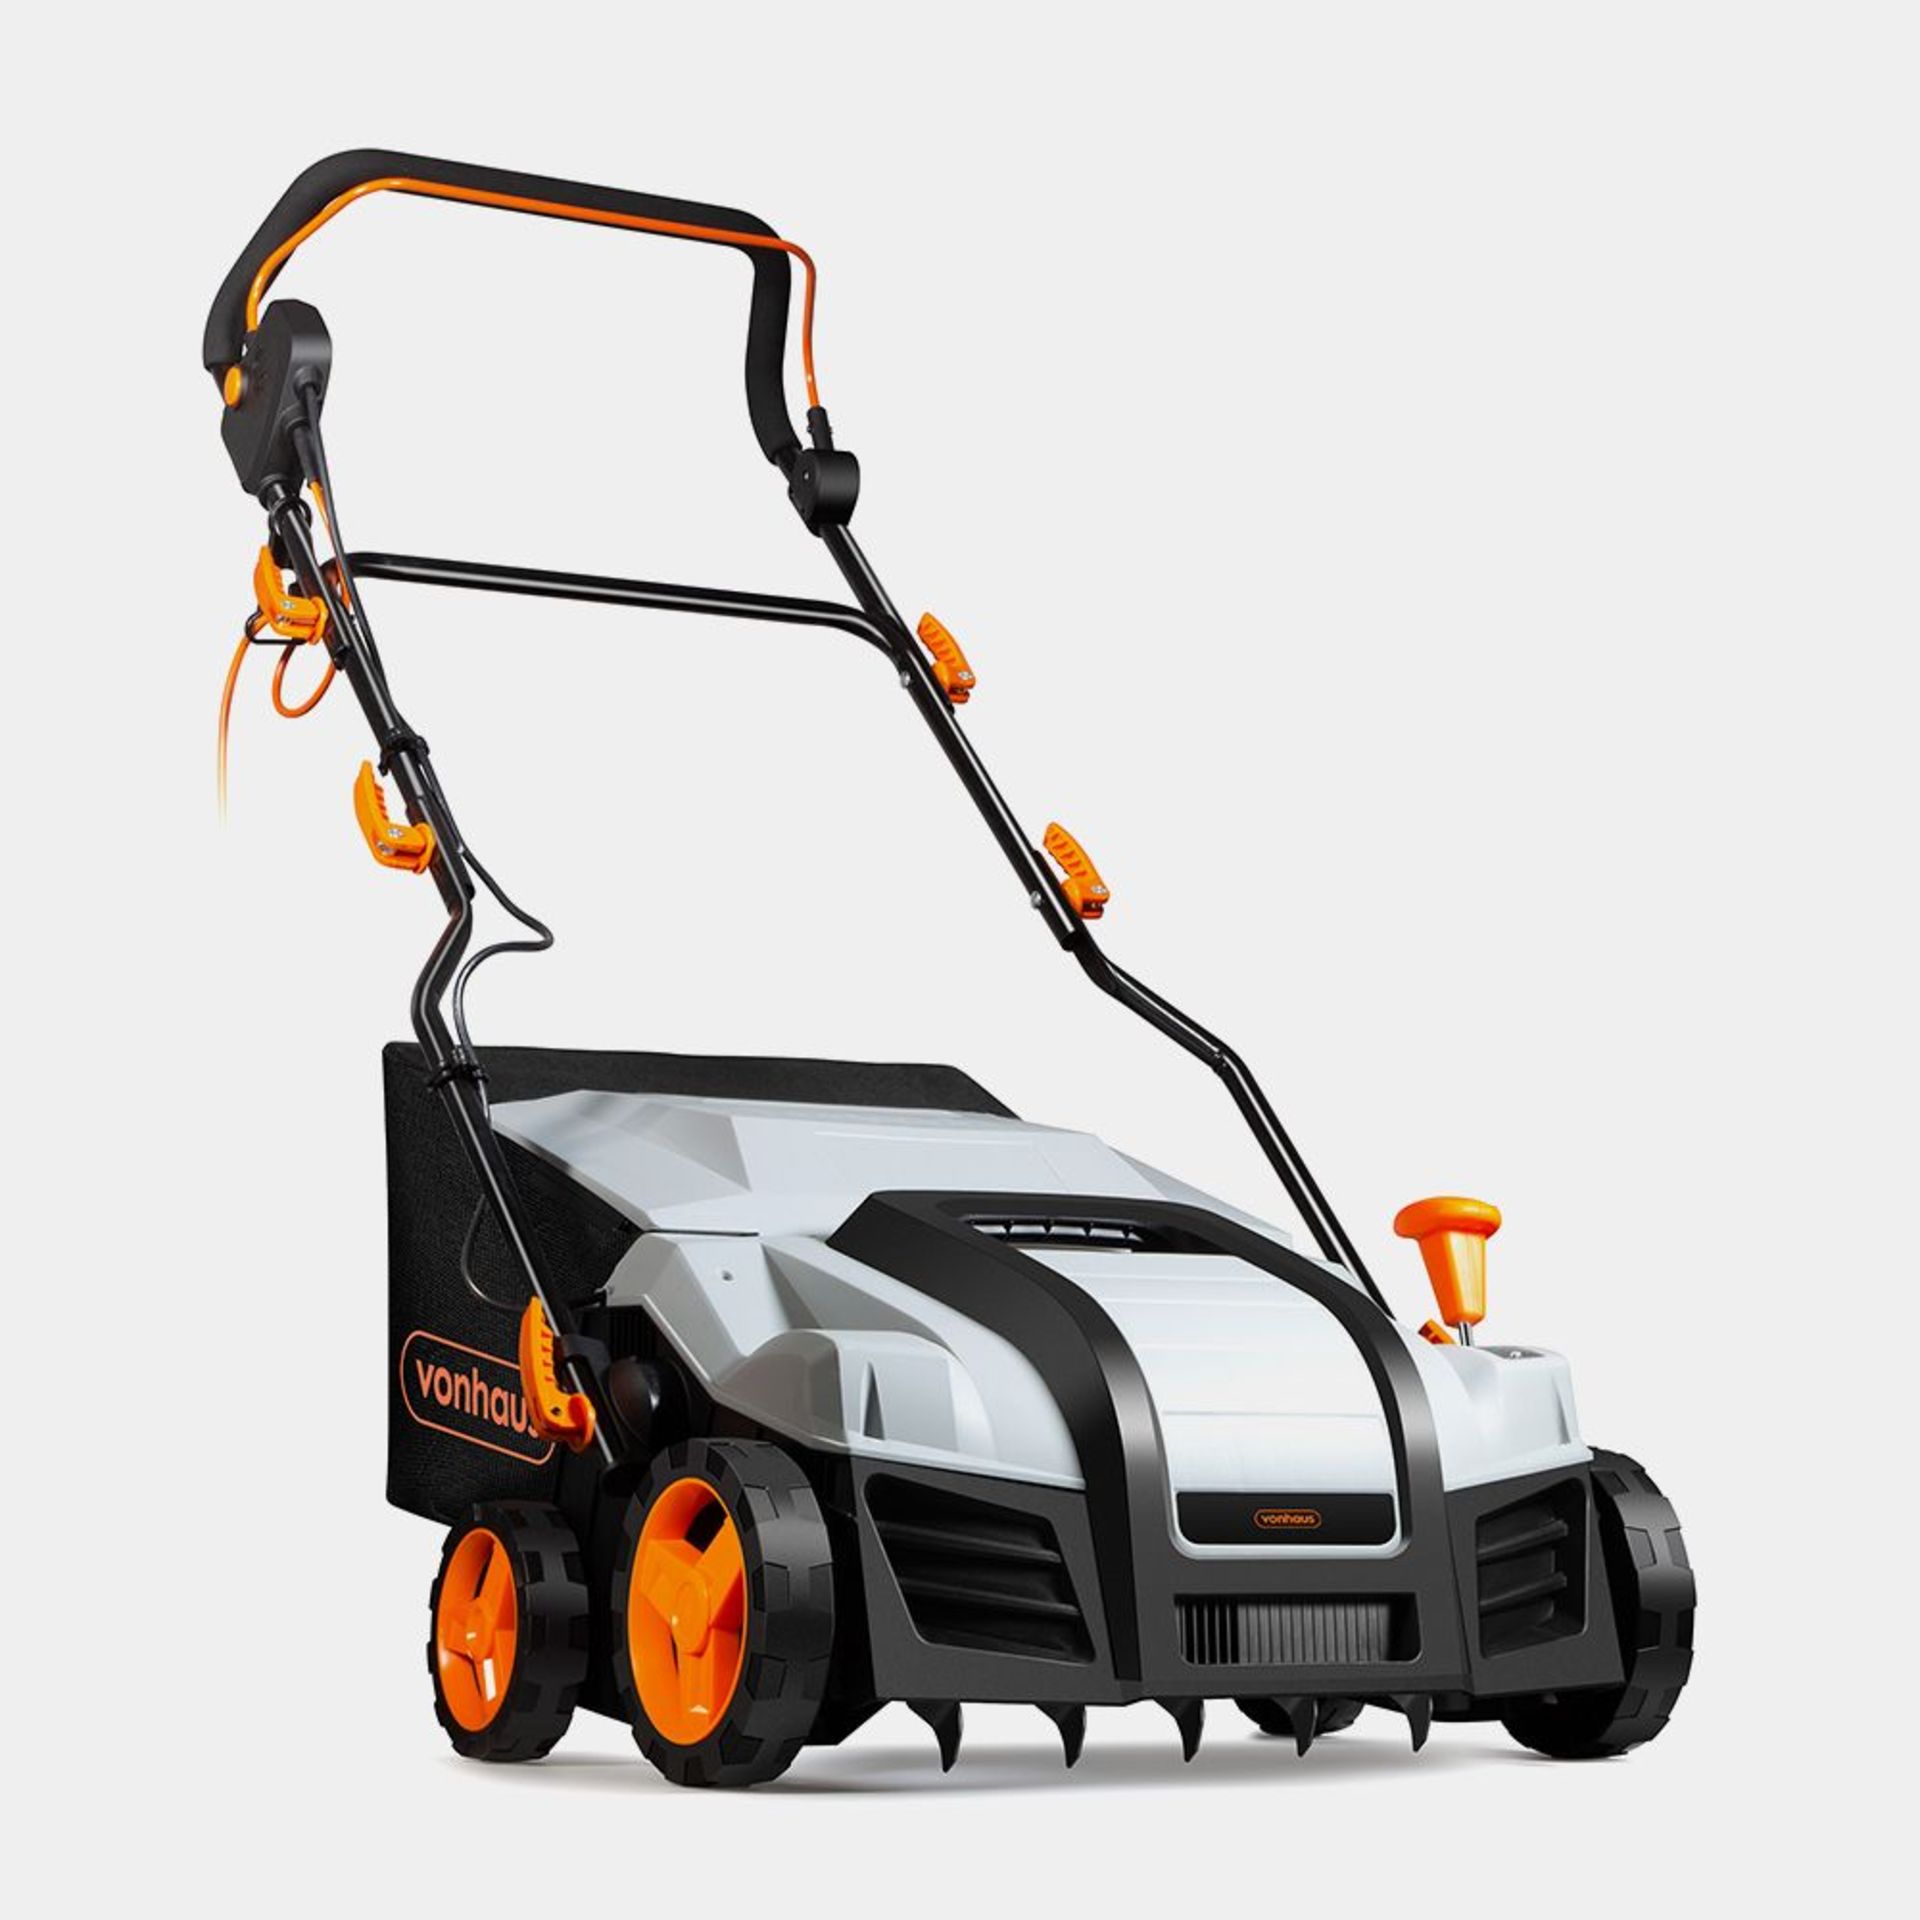 1800W Electric Lawn Scarifier & Rake. - BI. Equipped with two interchangeable rollers, the